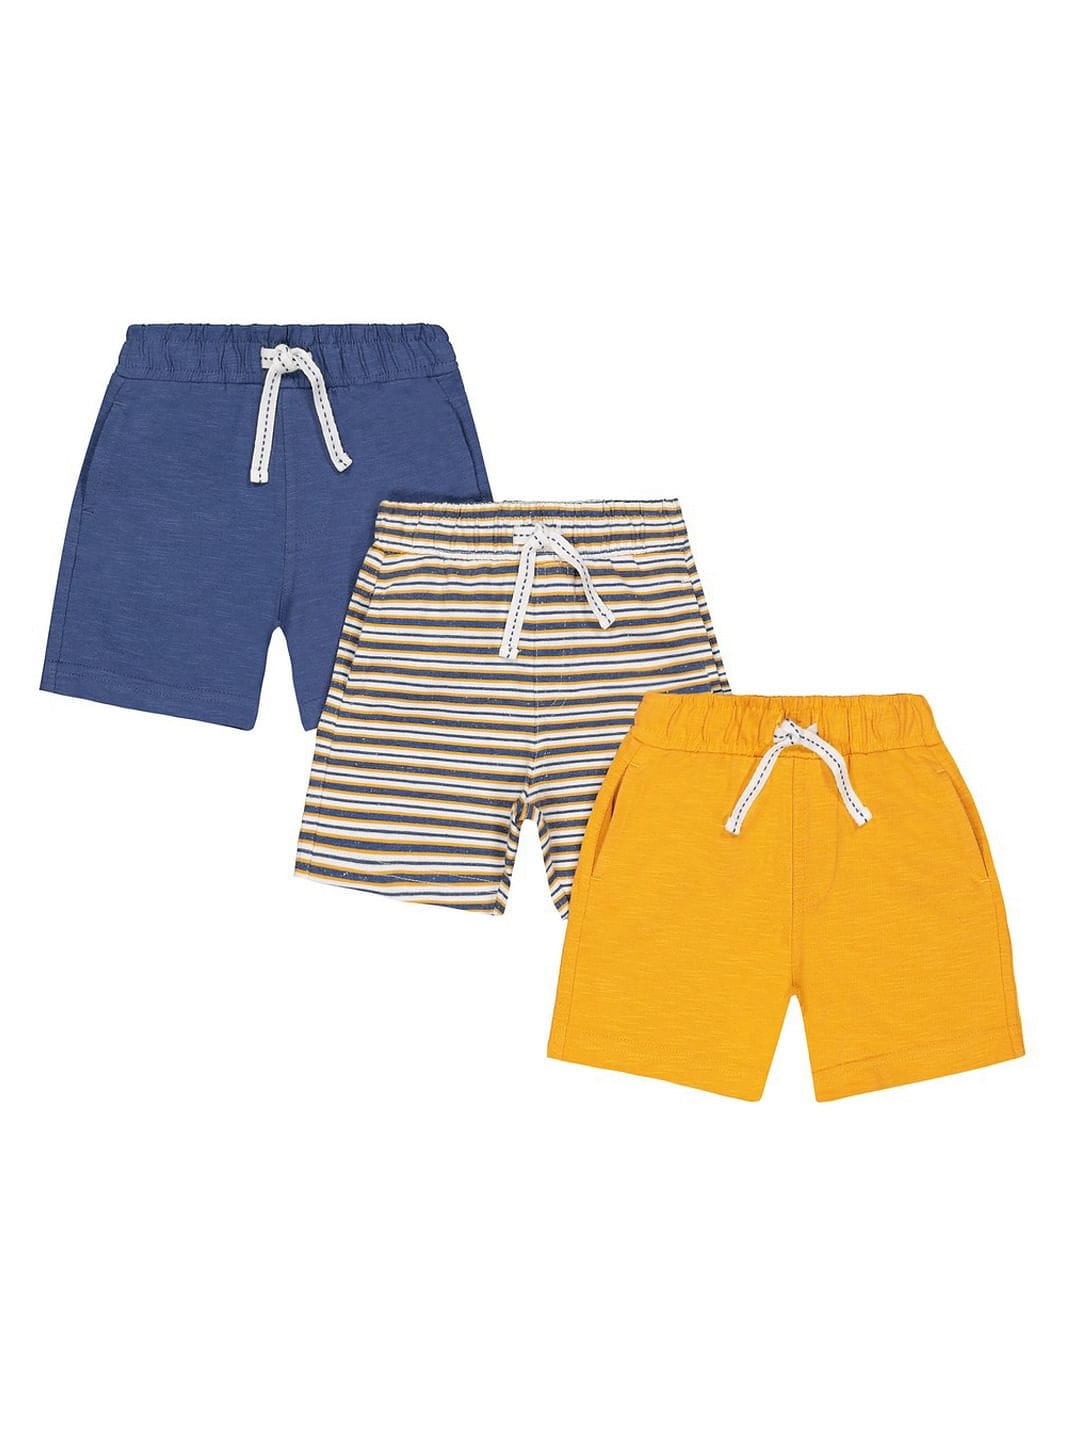 Mothercare | Blue, Yellow And Striped Shorts - 3 Pack 0